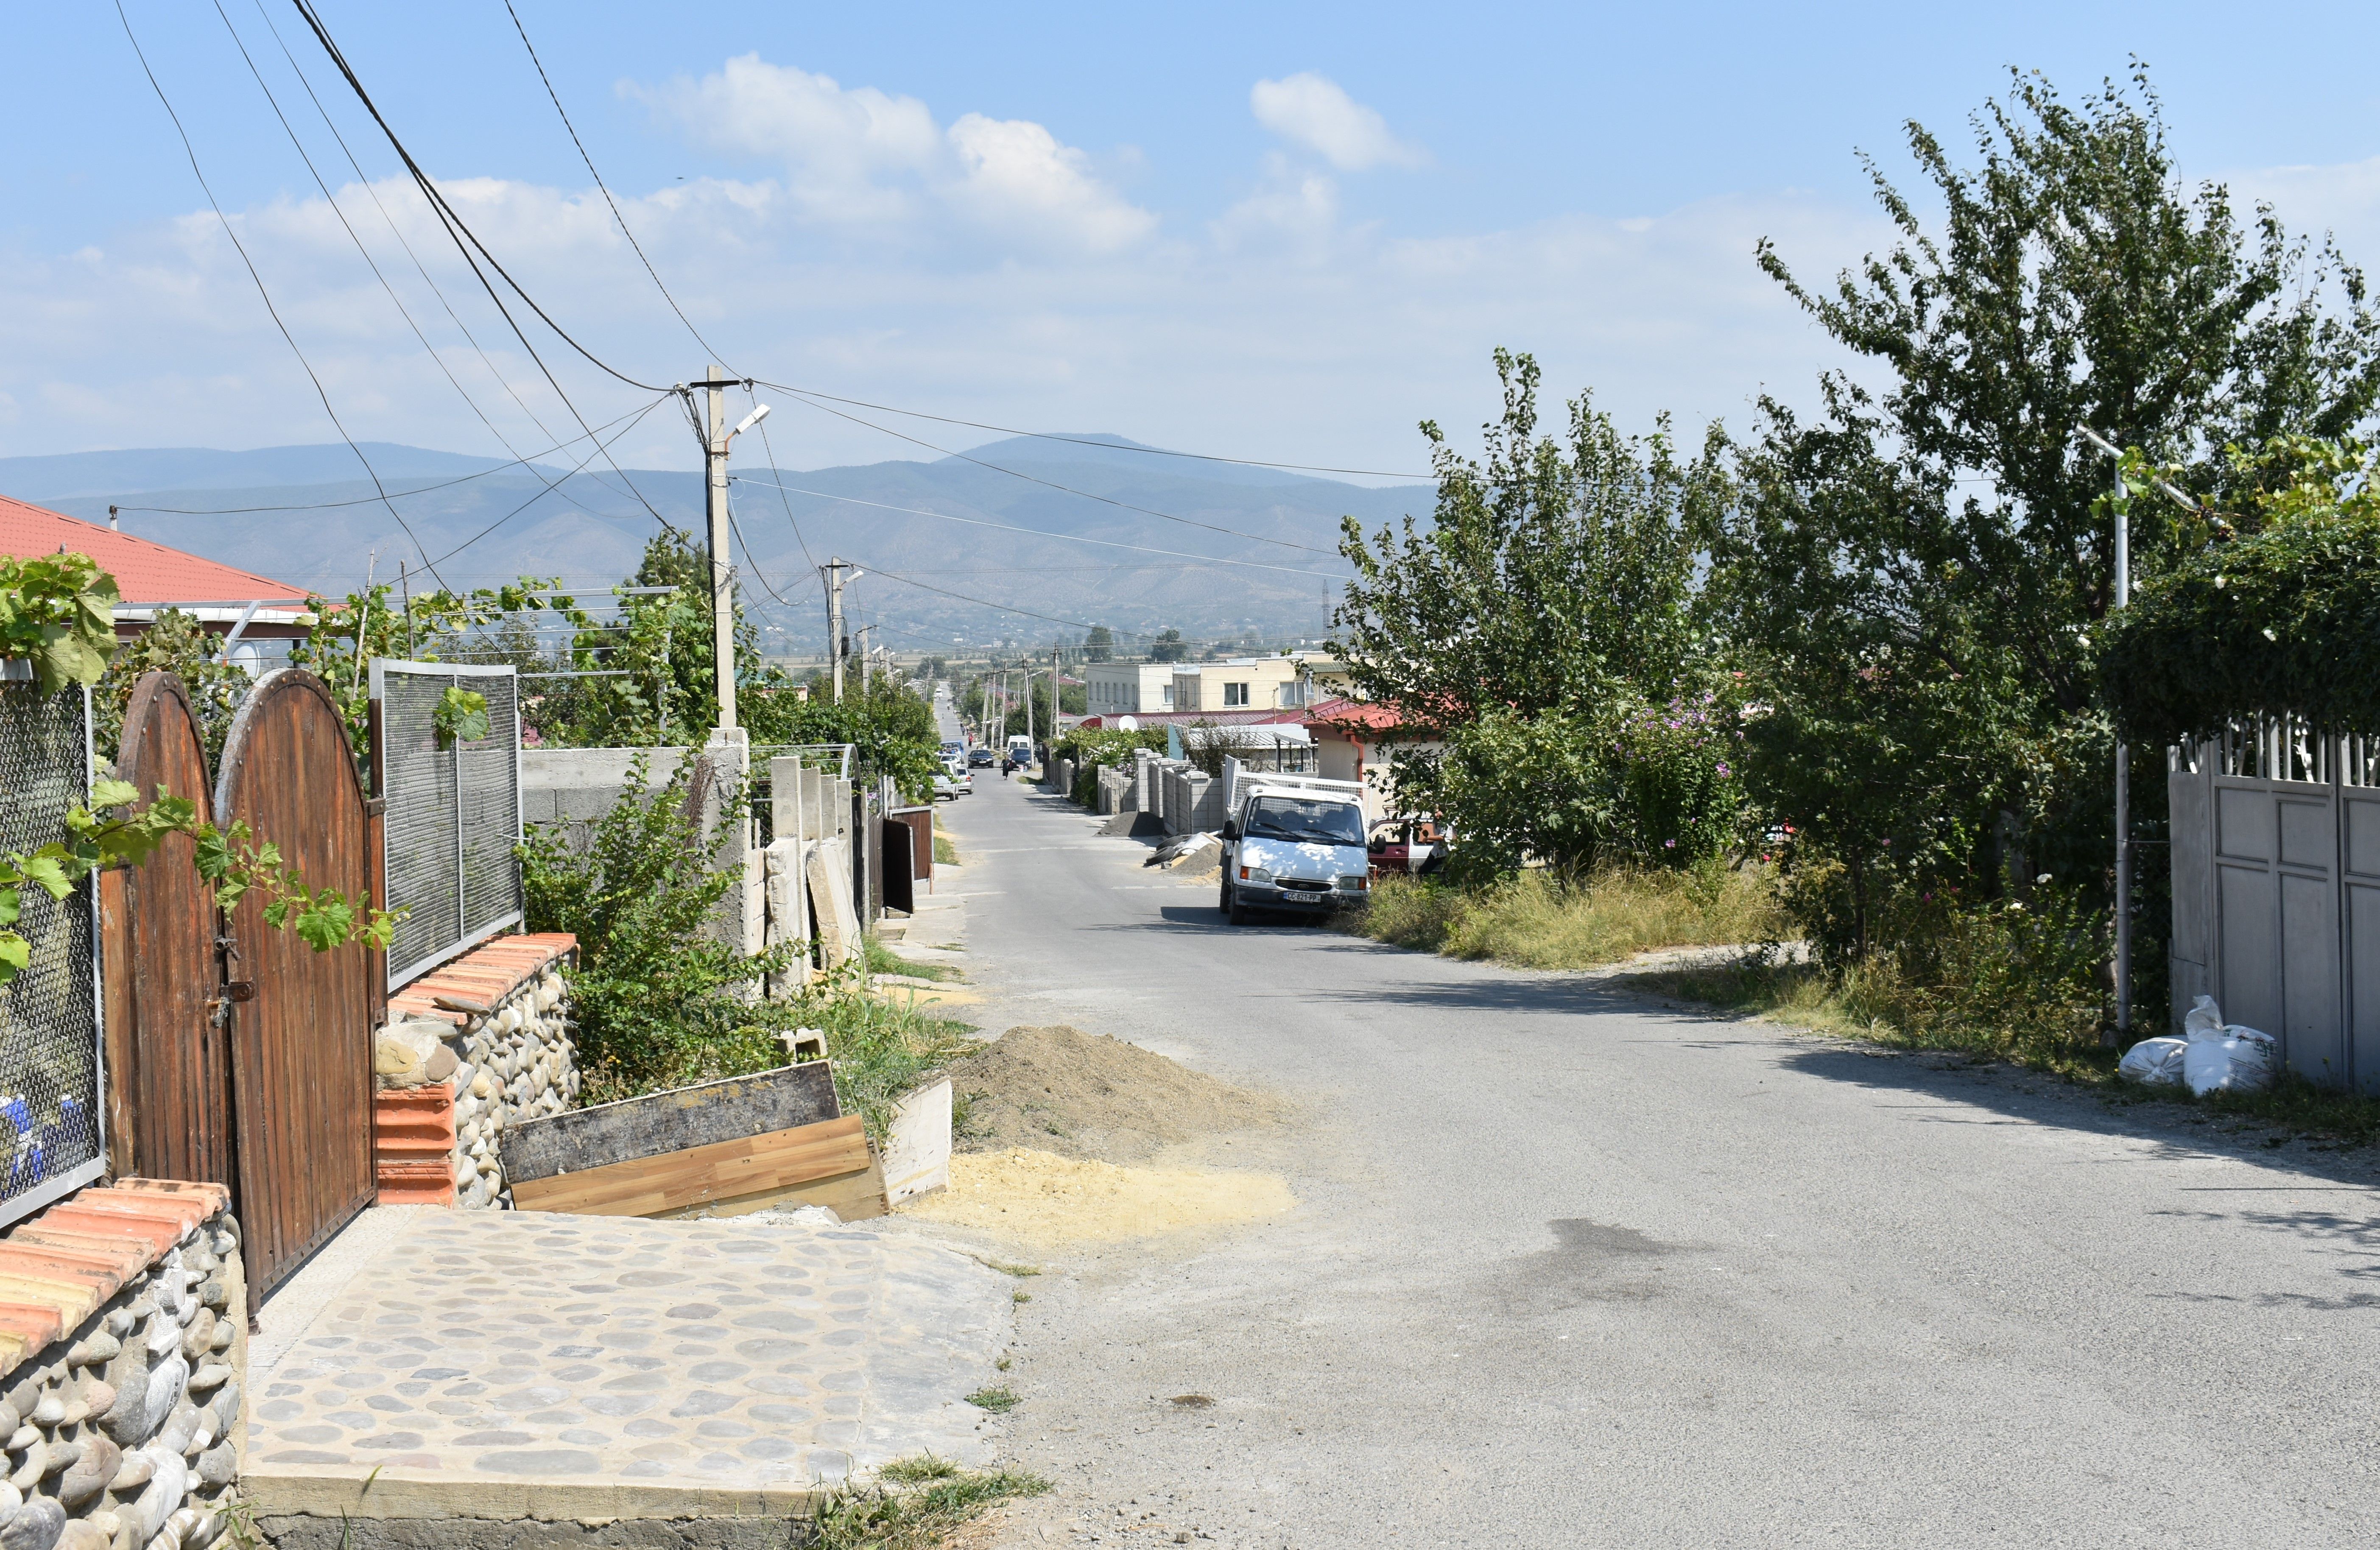 Homes in Tserovani, a government-built settlement for people displaced from South Ossetia. Image by Kaitlyn Johnson. Georgia, 2019.